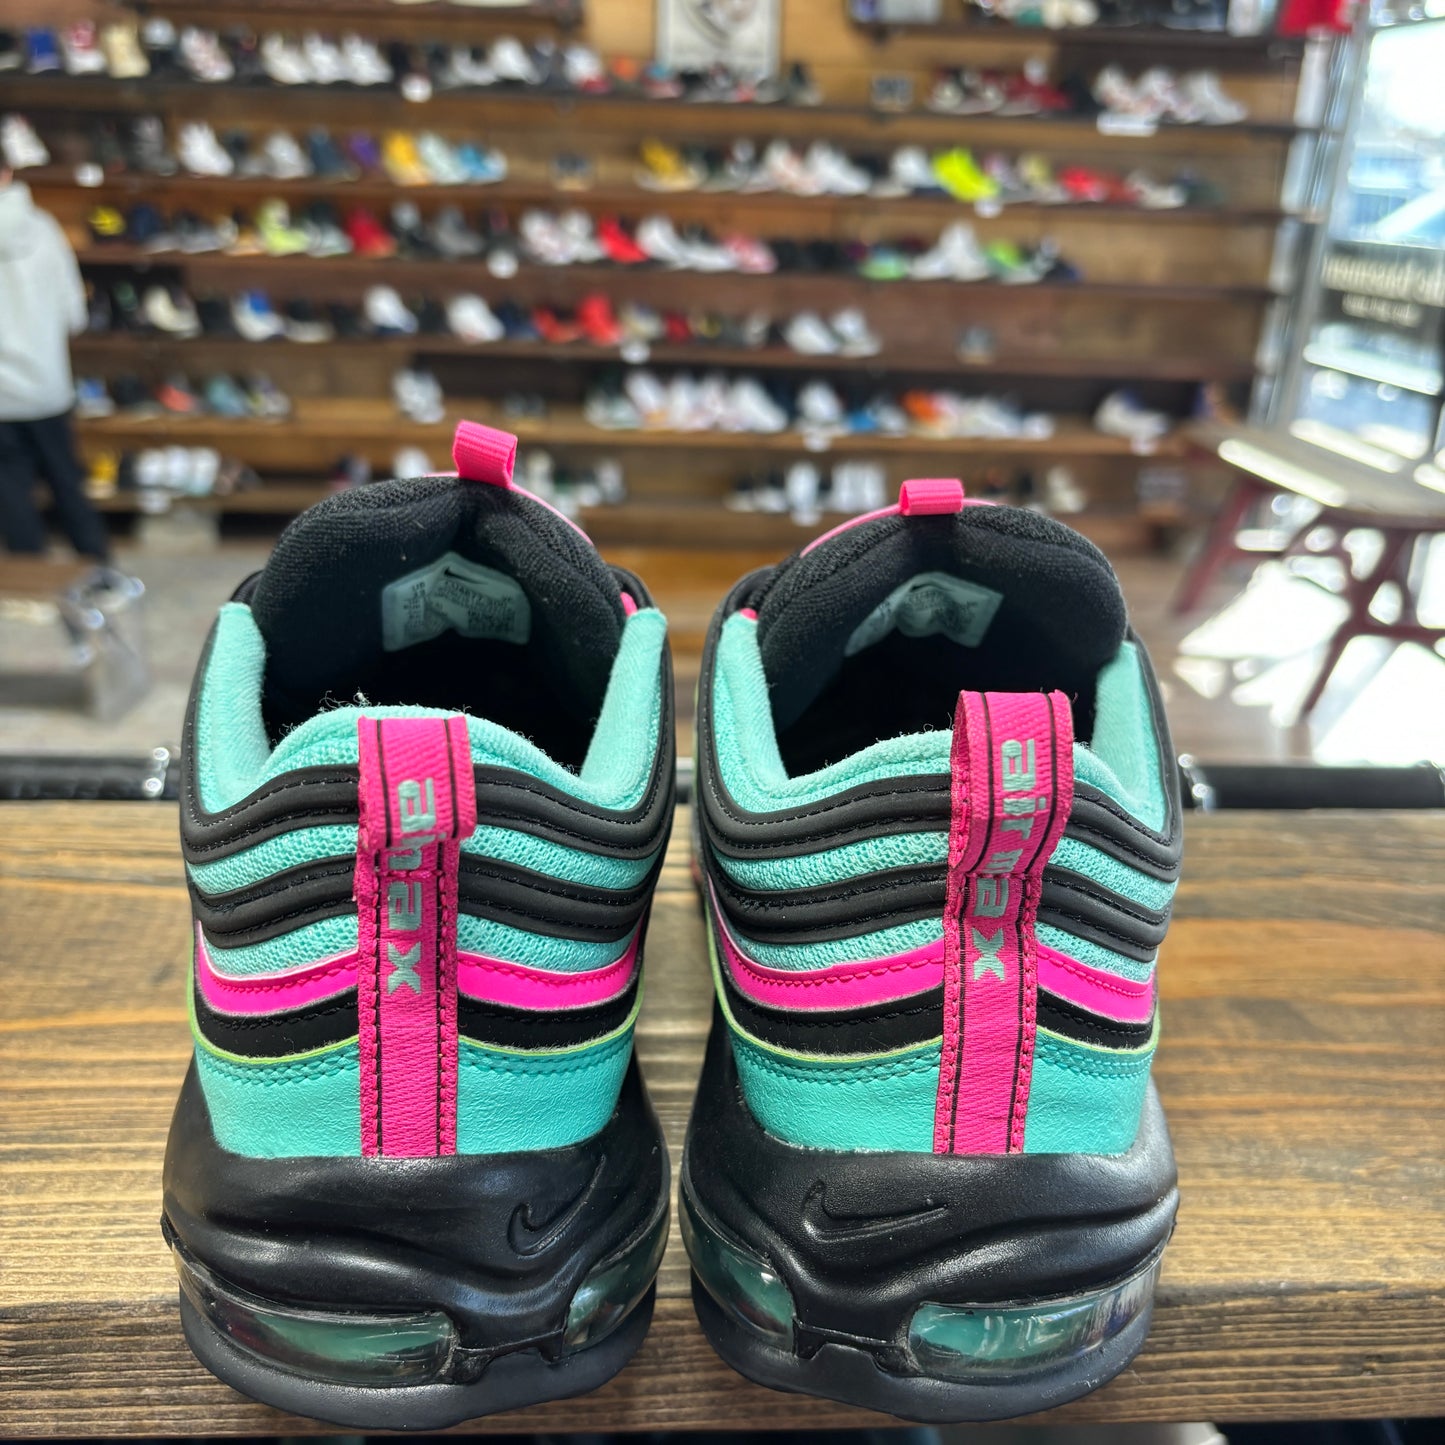 Nike Air Max 97 'Hyper Turquoise' Size 13